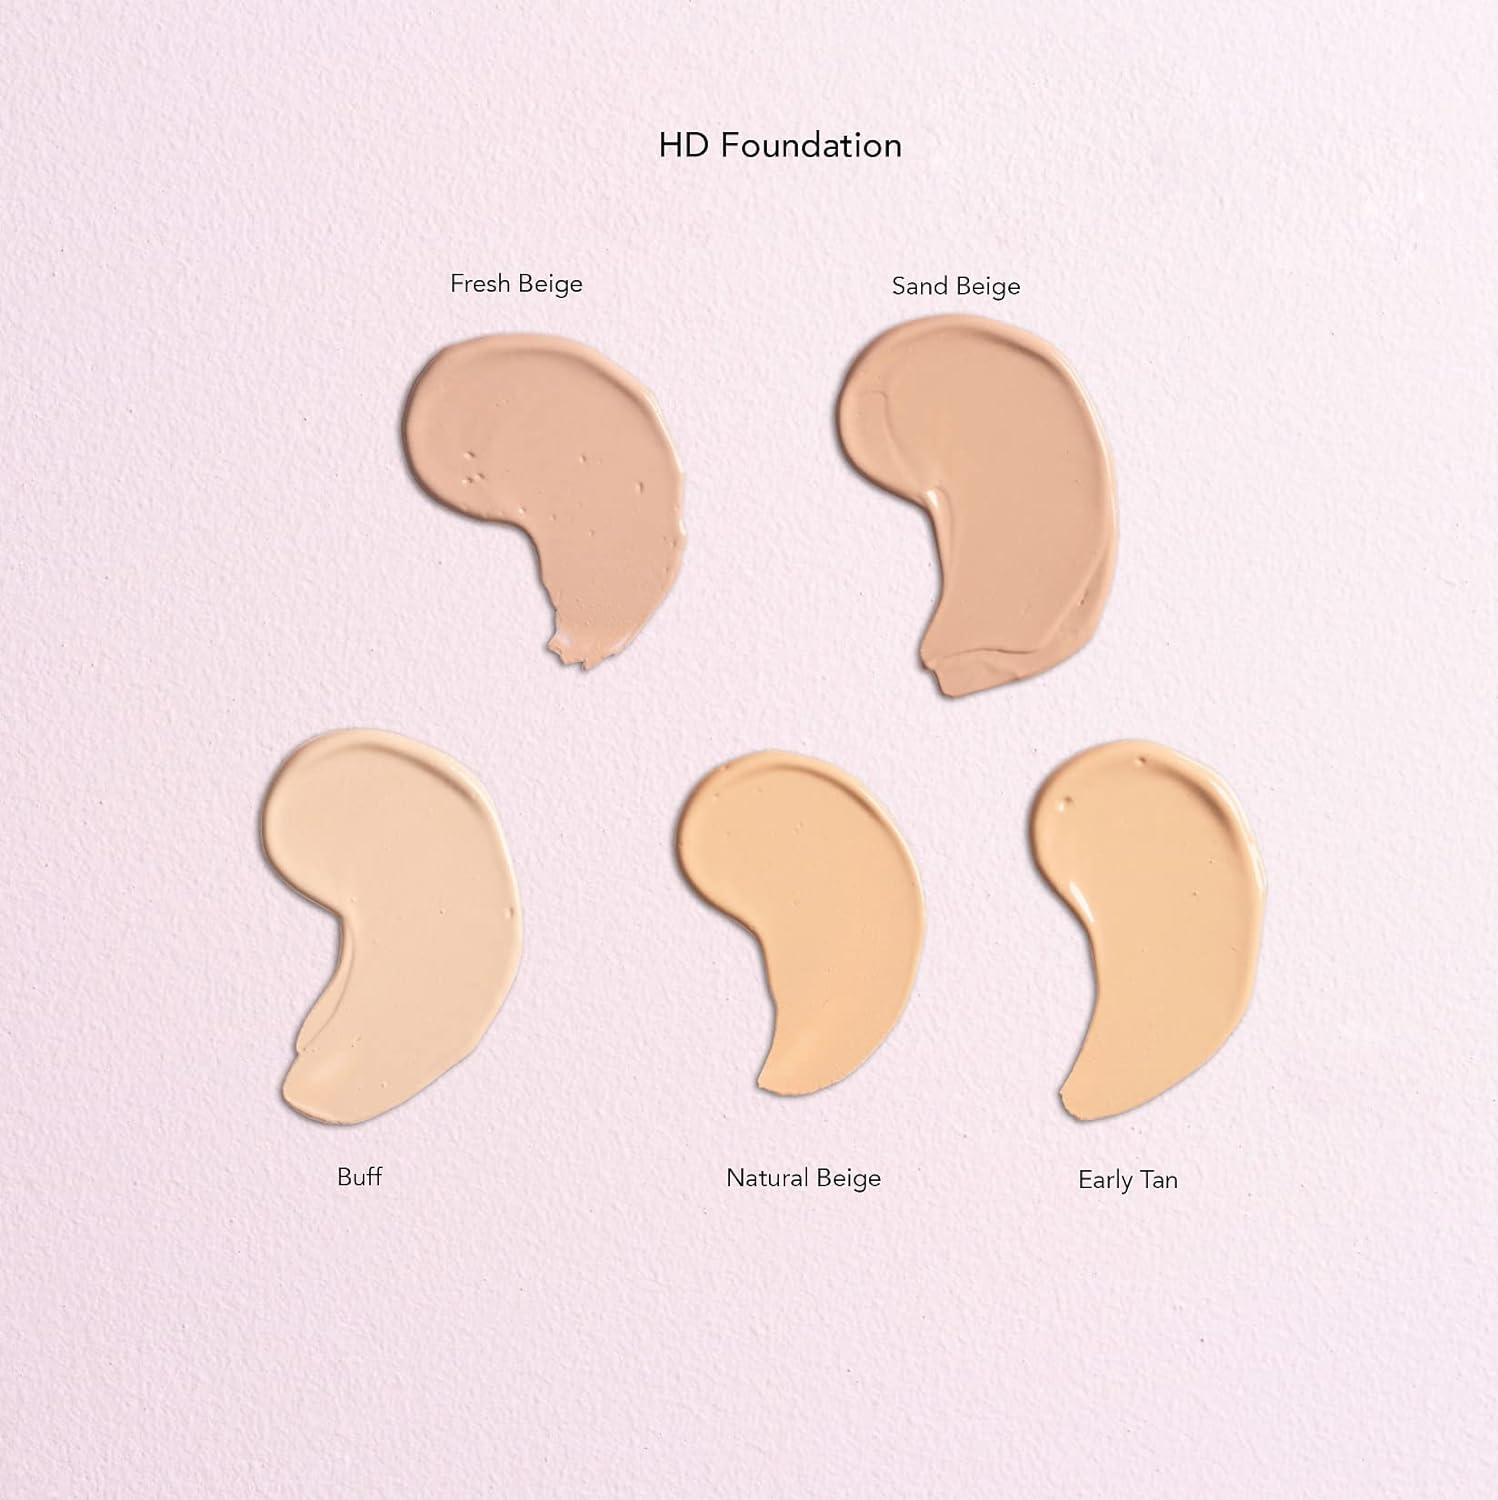 W7 | HD Foundation | Rich and Creamy Matte Formula | Medium Lasting Coverage | Available in 20 Shades | Sand Beige | Cruelty Free, Vegan Liquid Foundation Makeup by W7 Cosmetics : Beauty & Personal Care